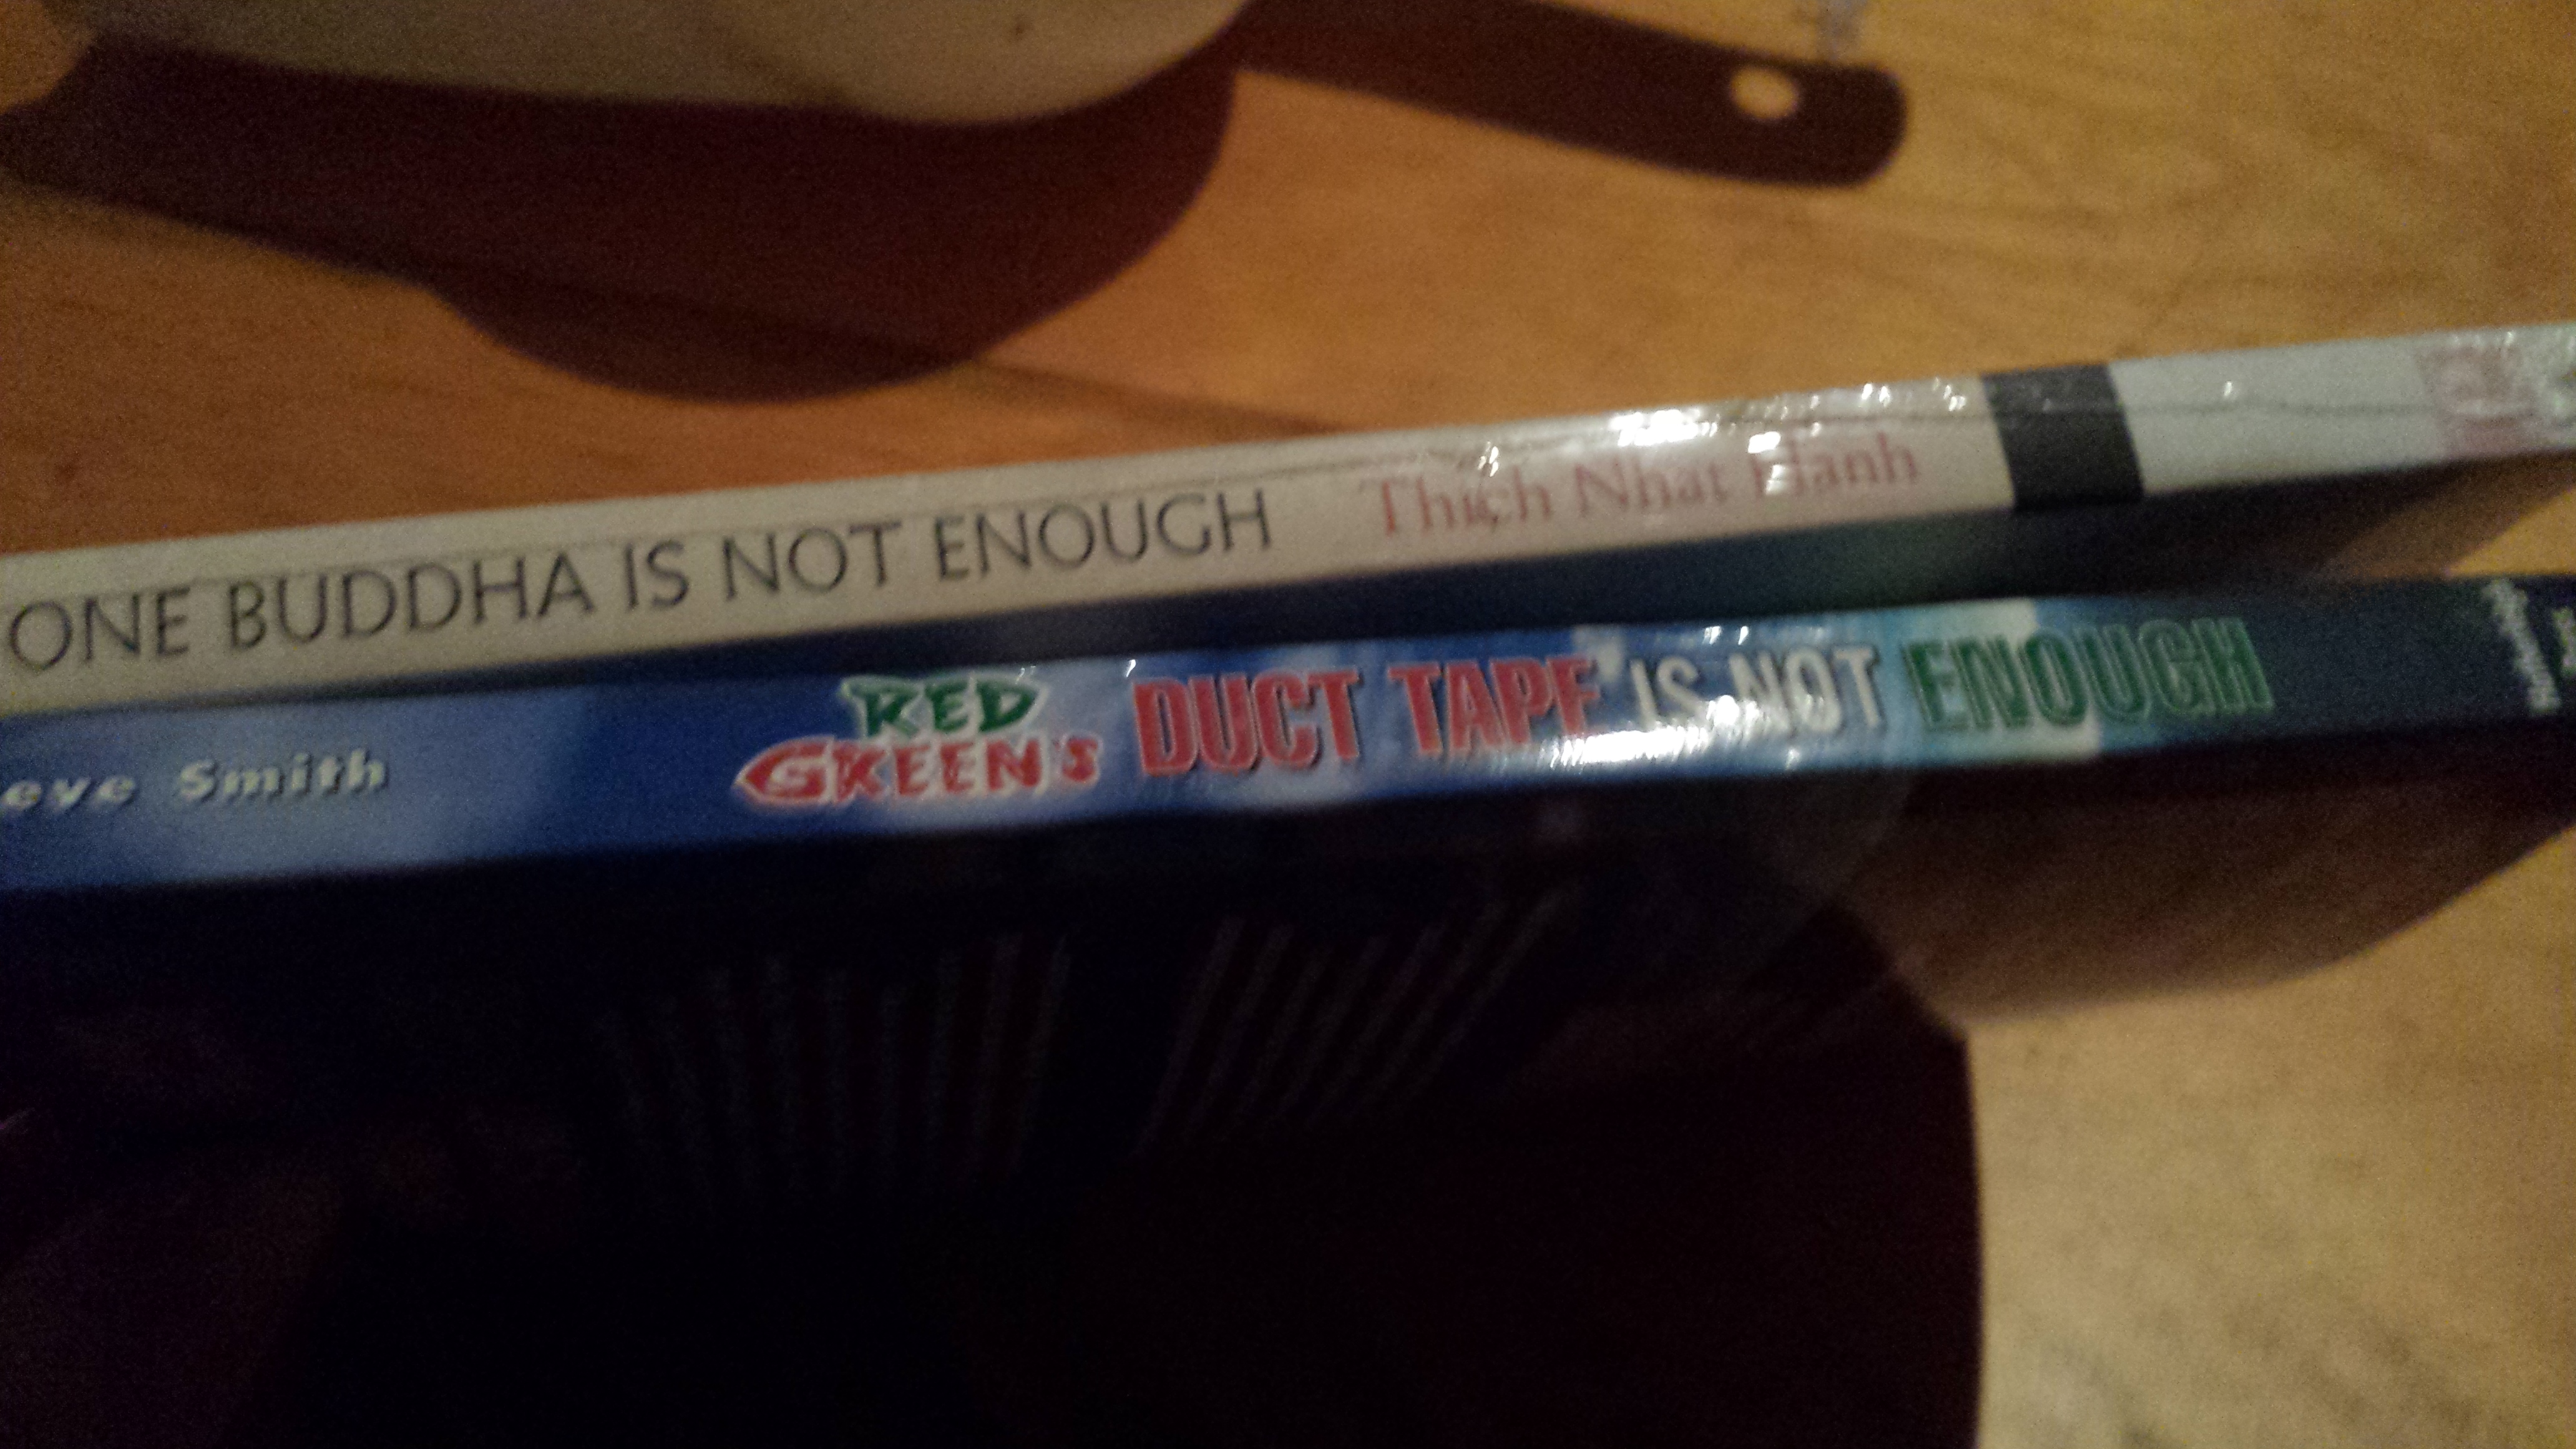 Two books: "One Buddha is Not Enough" and "Duct Tape is Not Enough"